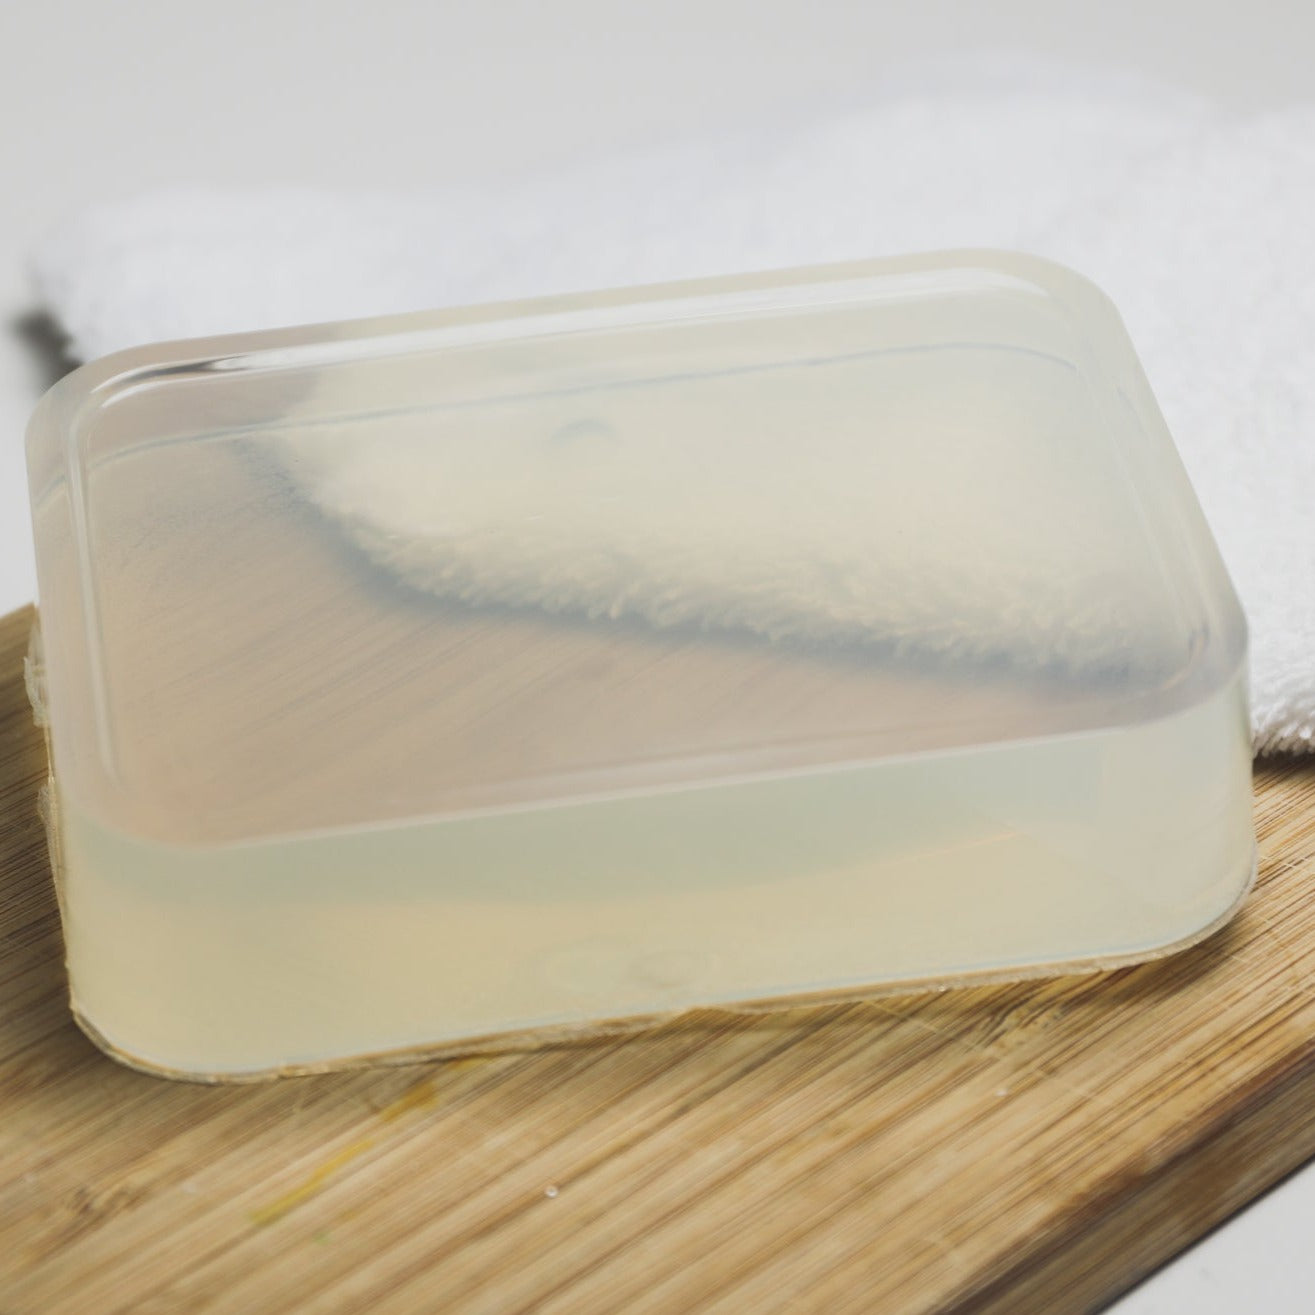 Introduction to Melt & Pour Soap Making Kit